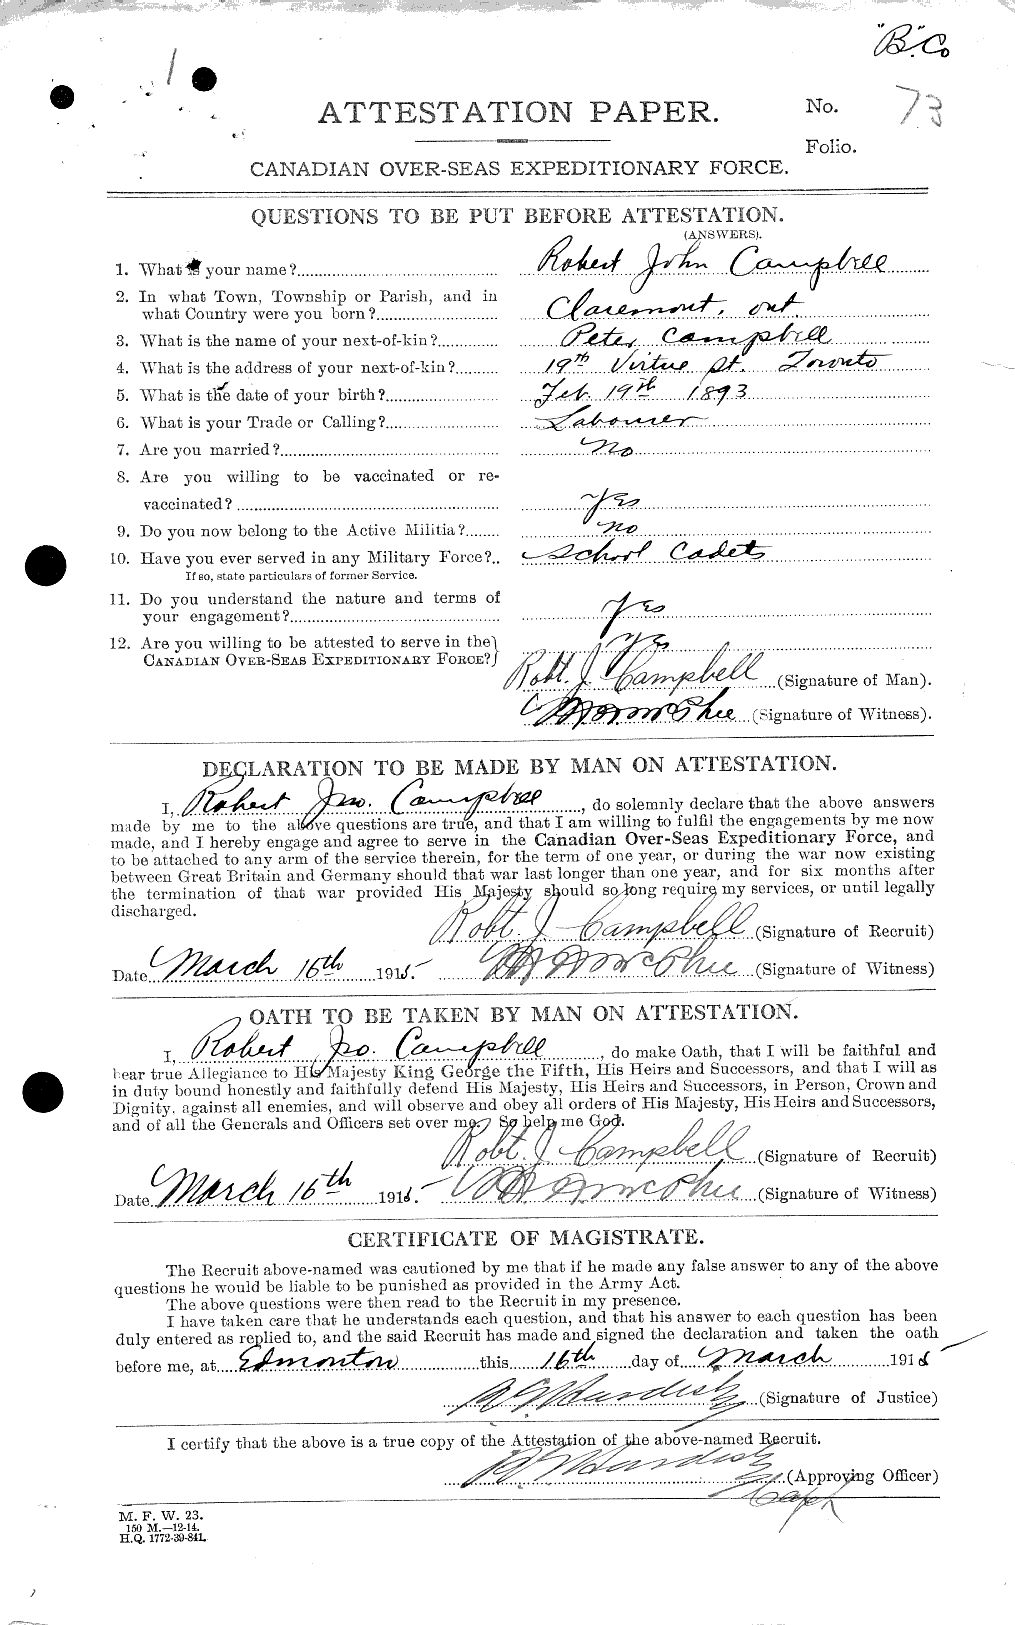 Personnel Records of the First World War - CEF 003884a